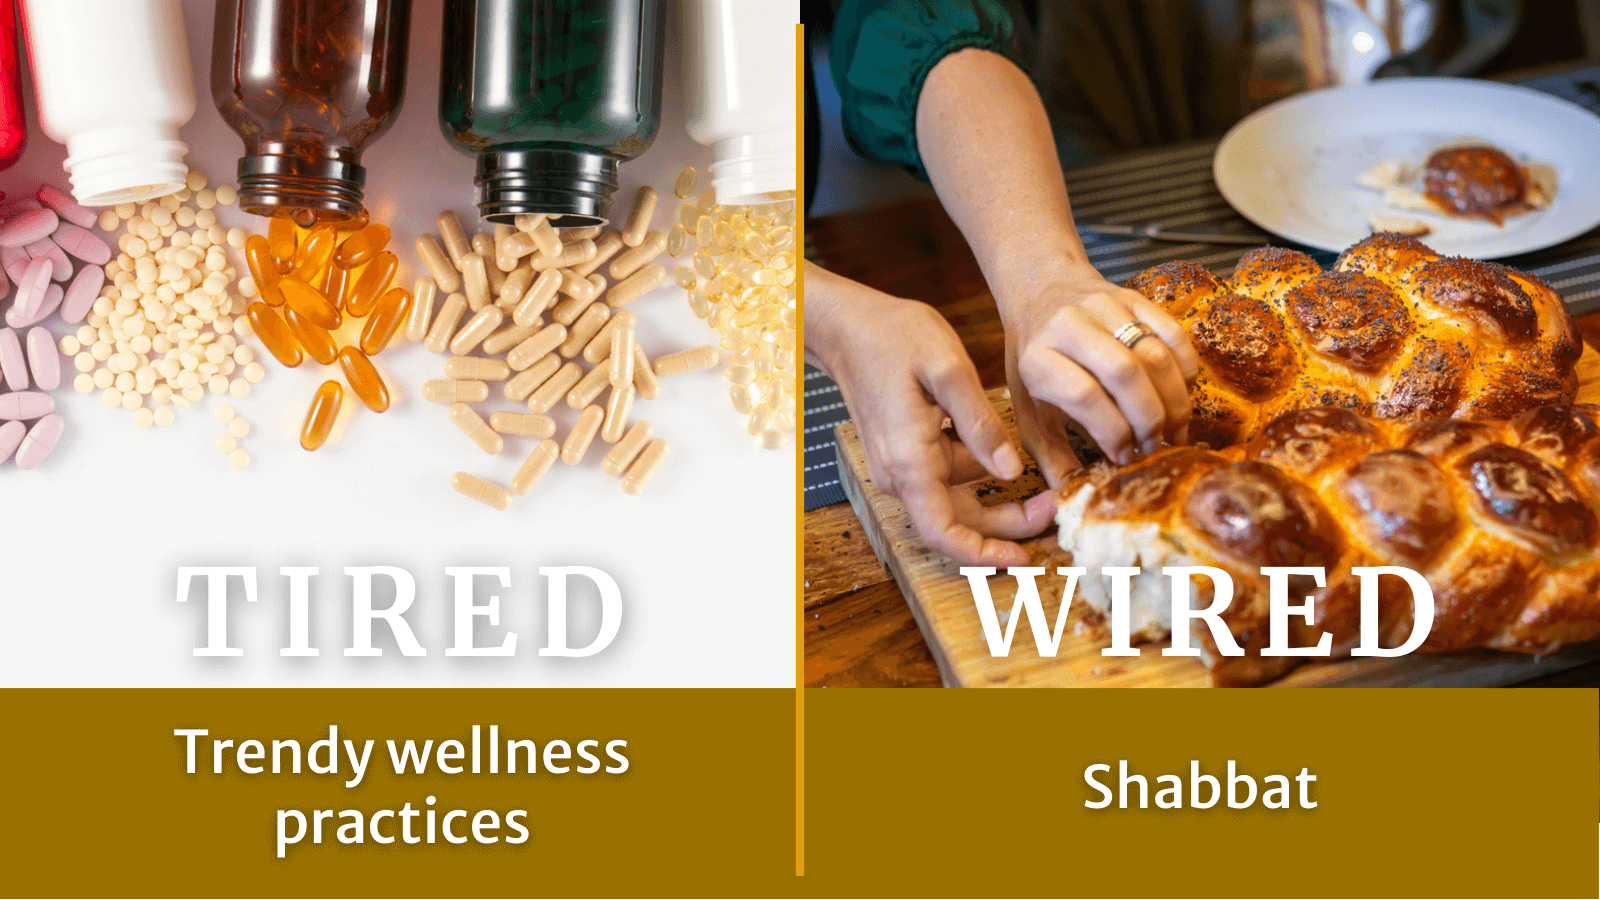 Tired: Trendy wellness practices. Wired: Shabbat.